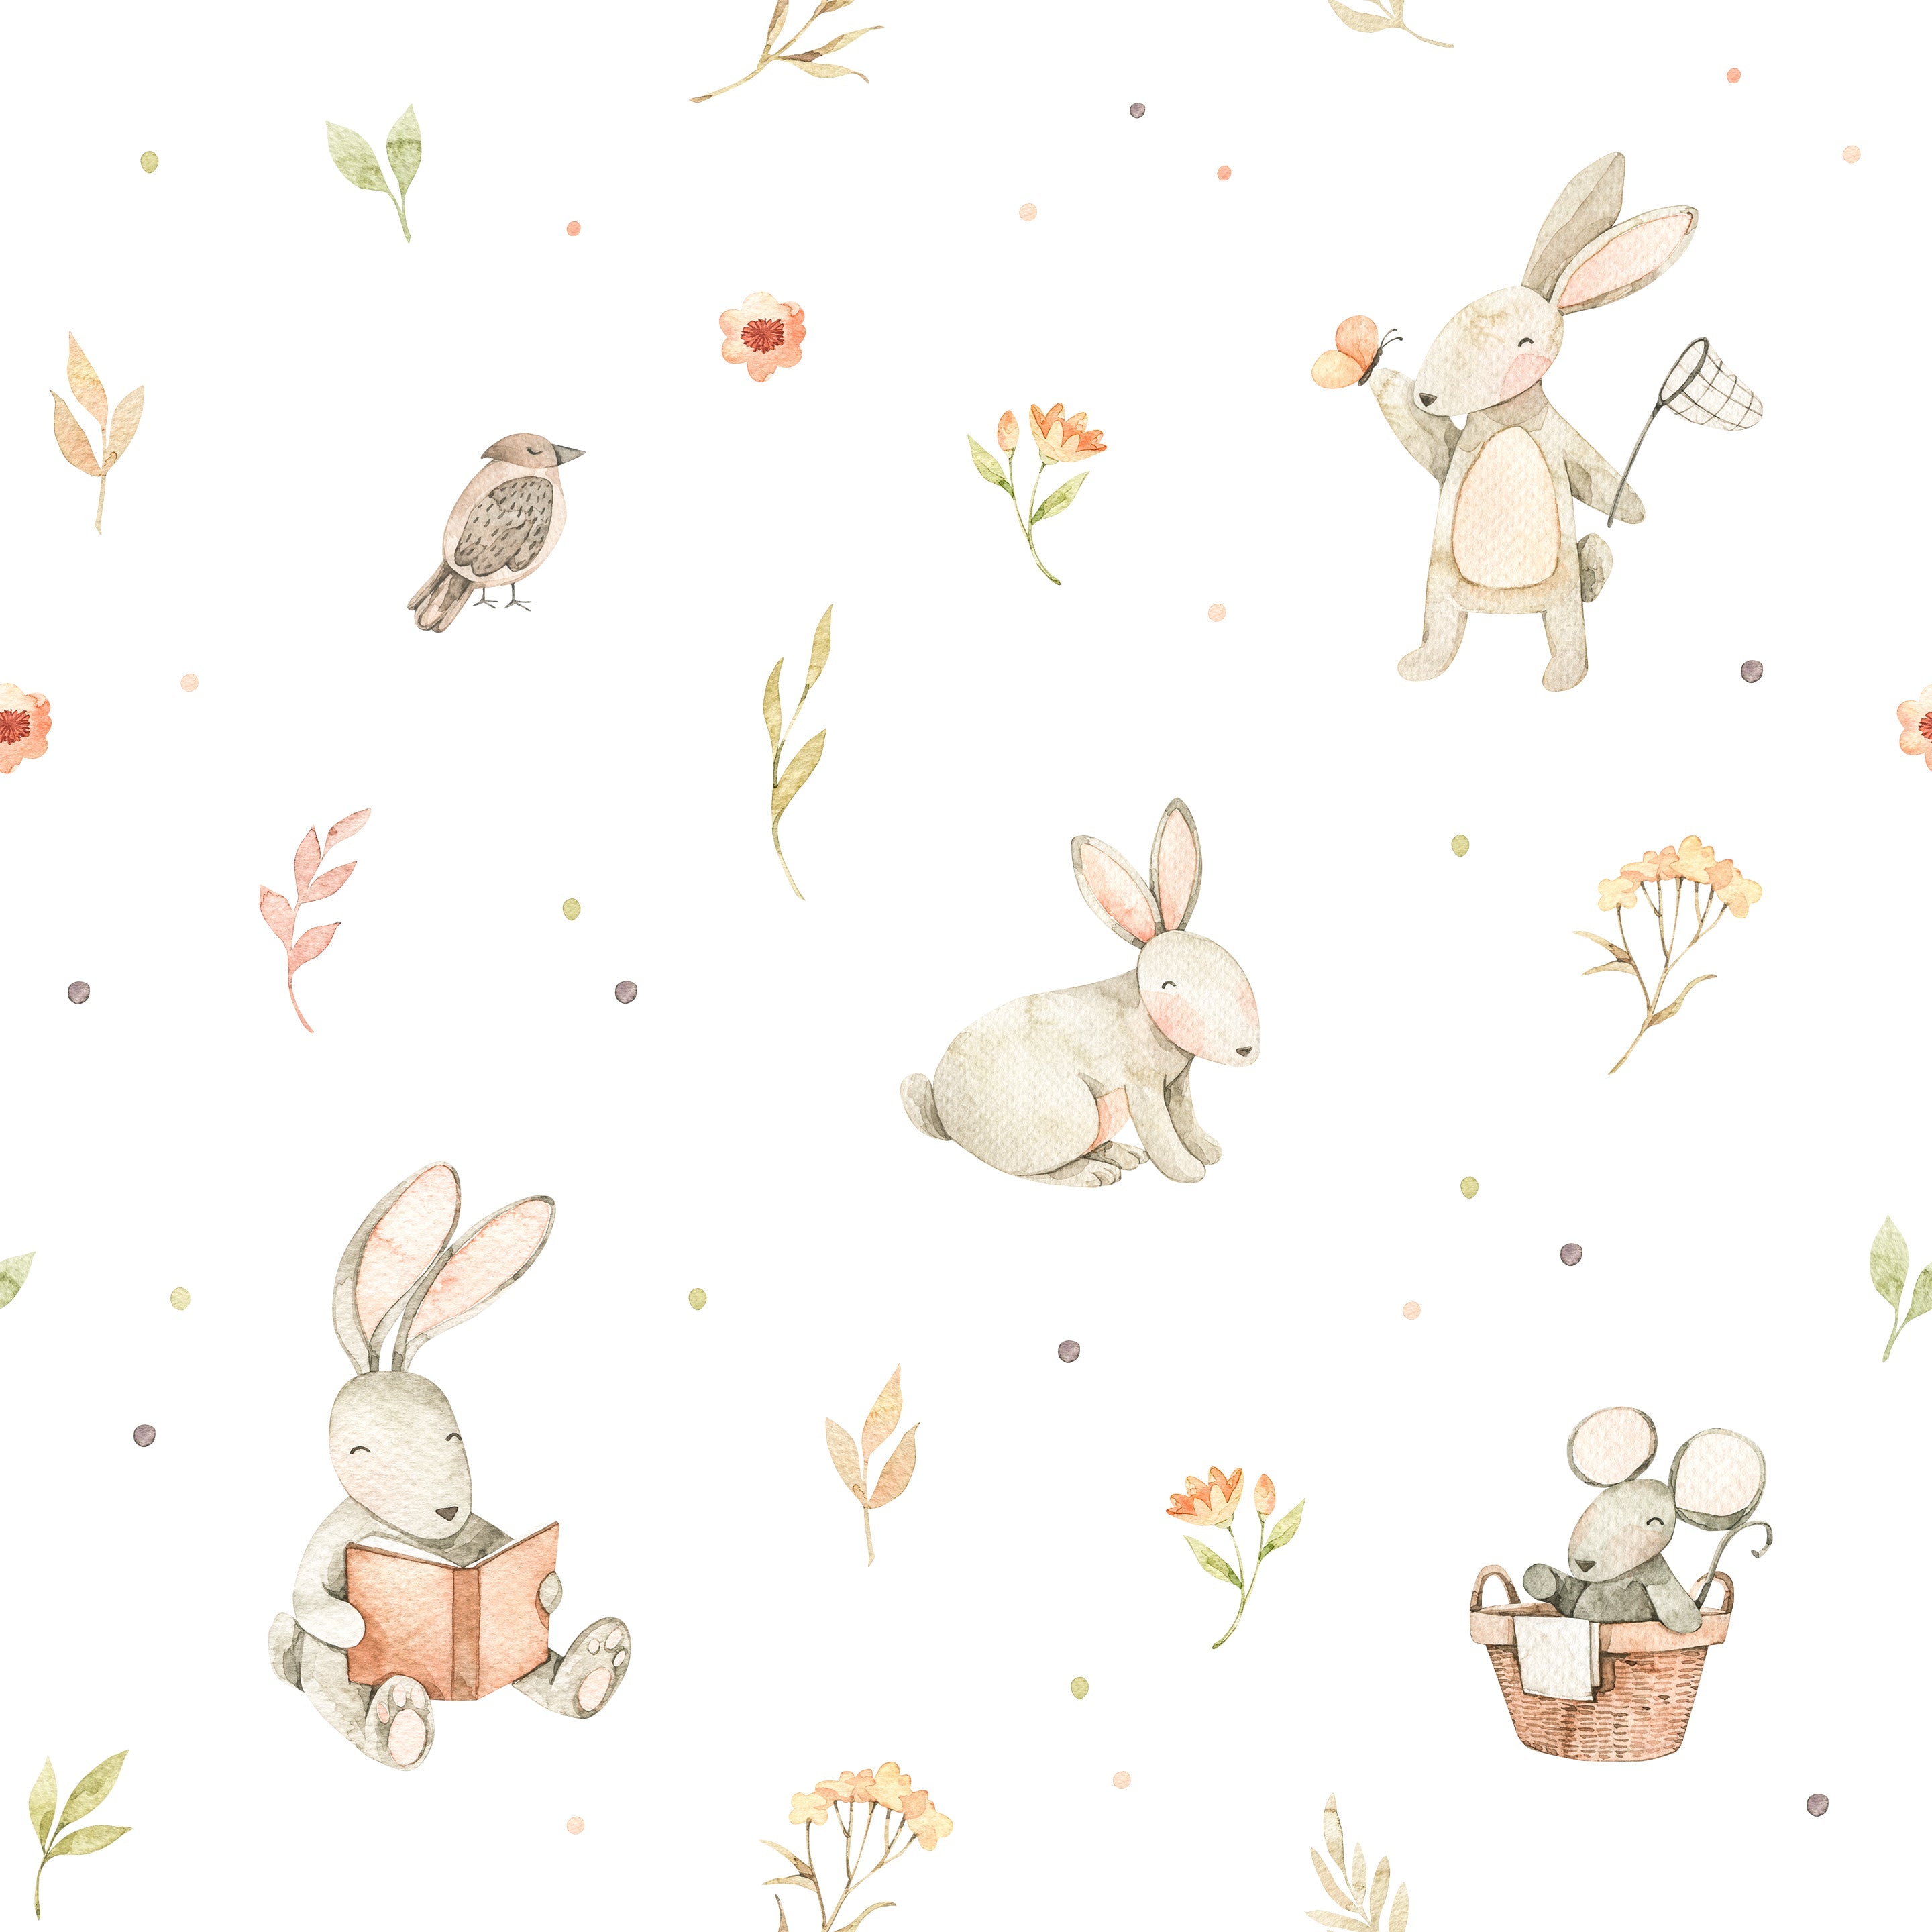 A close-up view of the Watercolour Bunnies Wallpaper, featuring charming illustrations of bunnies in various playful activities like reading and holding a butterfly net, interspersed with delicate flowers and leaves in a soft watercolor style on a white background.